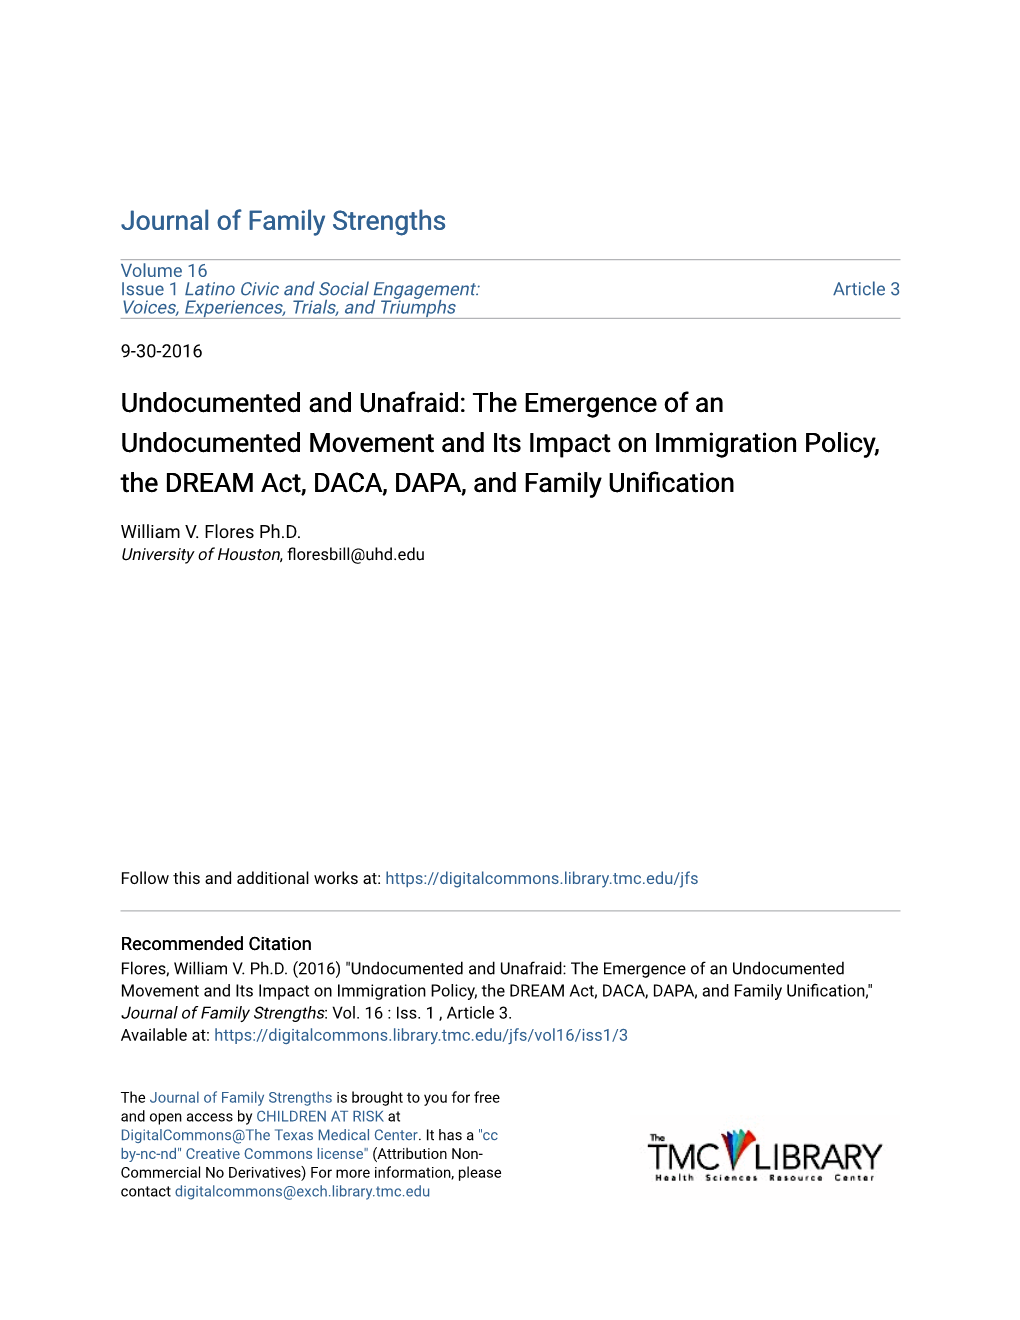 The Emergence of an Undocumented Movement and Its Impact on Immigration Policy, the DREAM Act, DACA, DAPA, and Family Unification